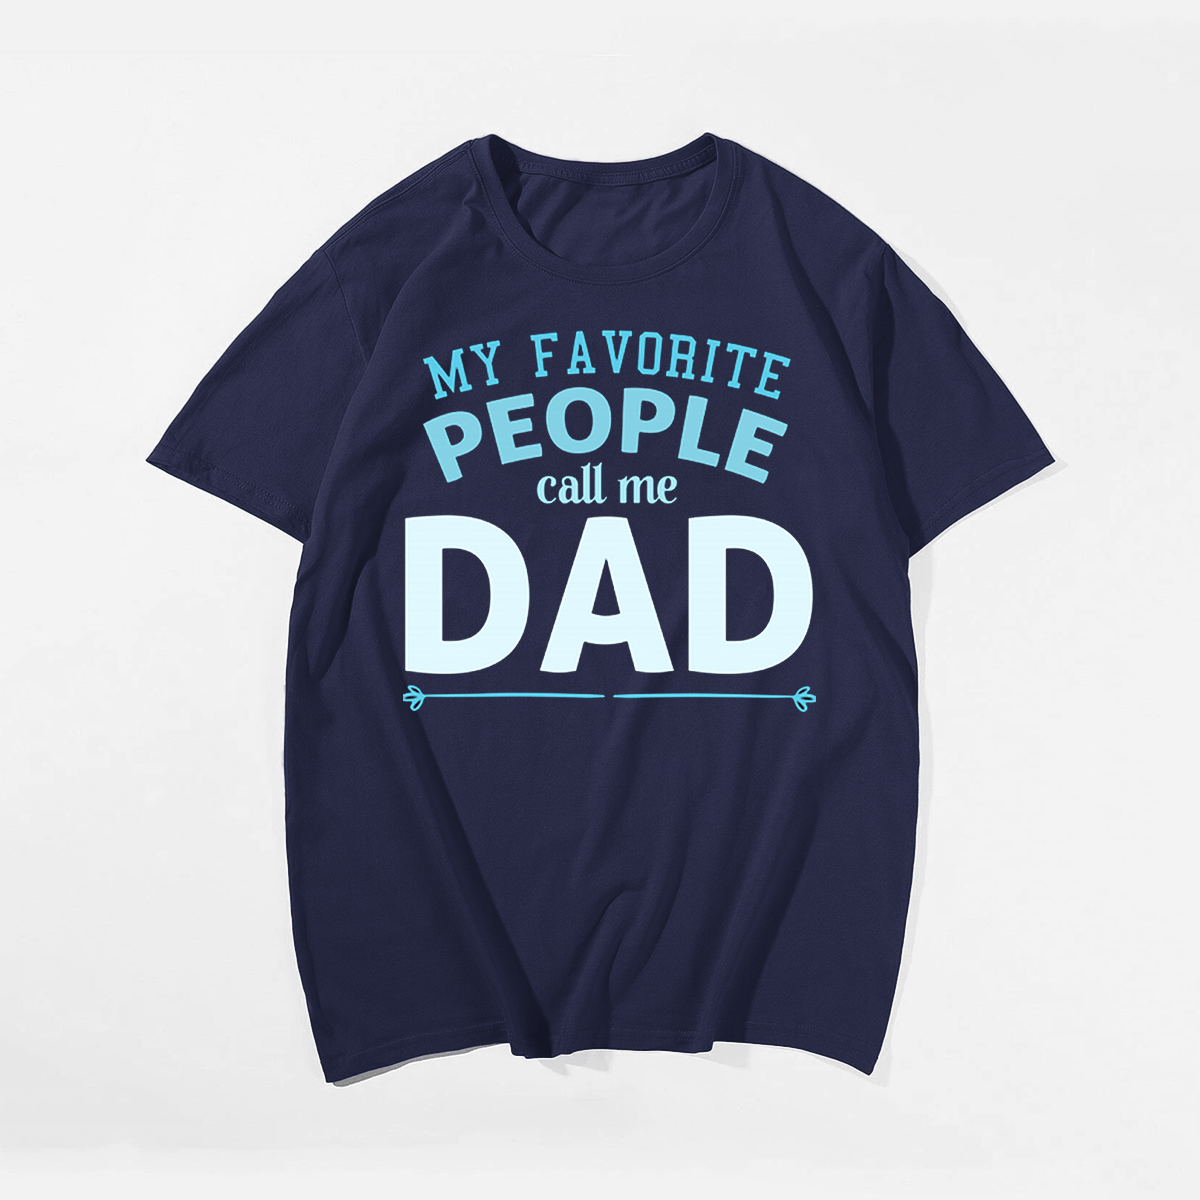 My Favorite People Call Me Dad T-shirt for Men, Oversize Plus Size Big & Tall Man Clothing